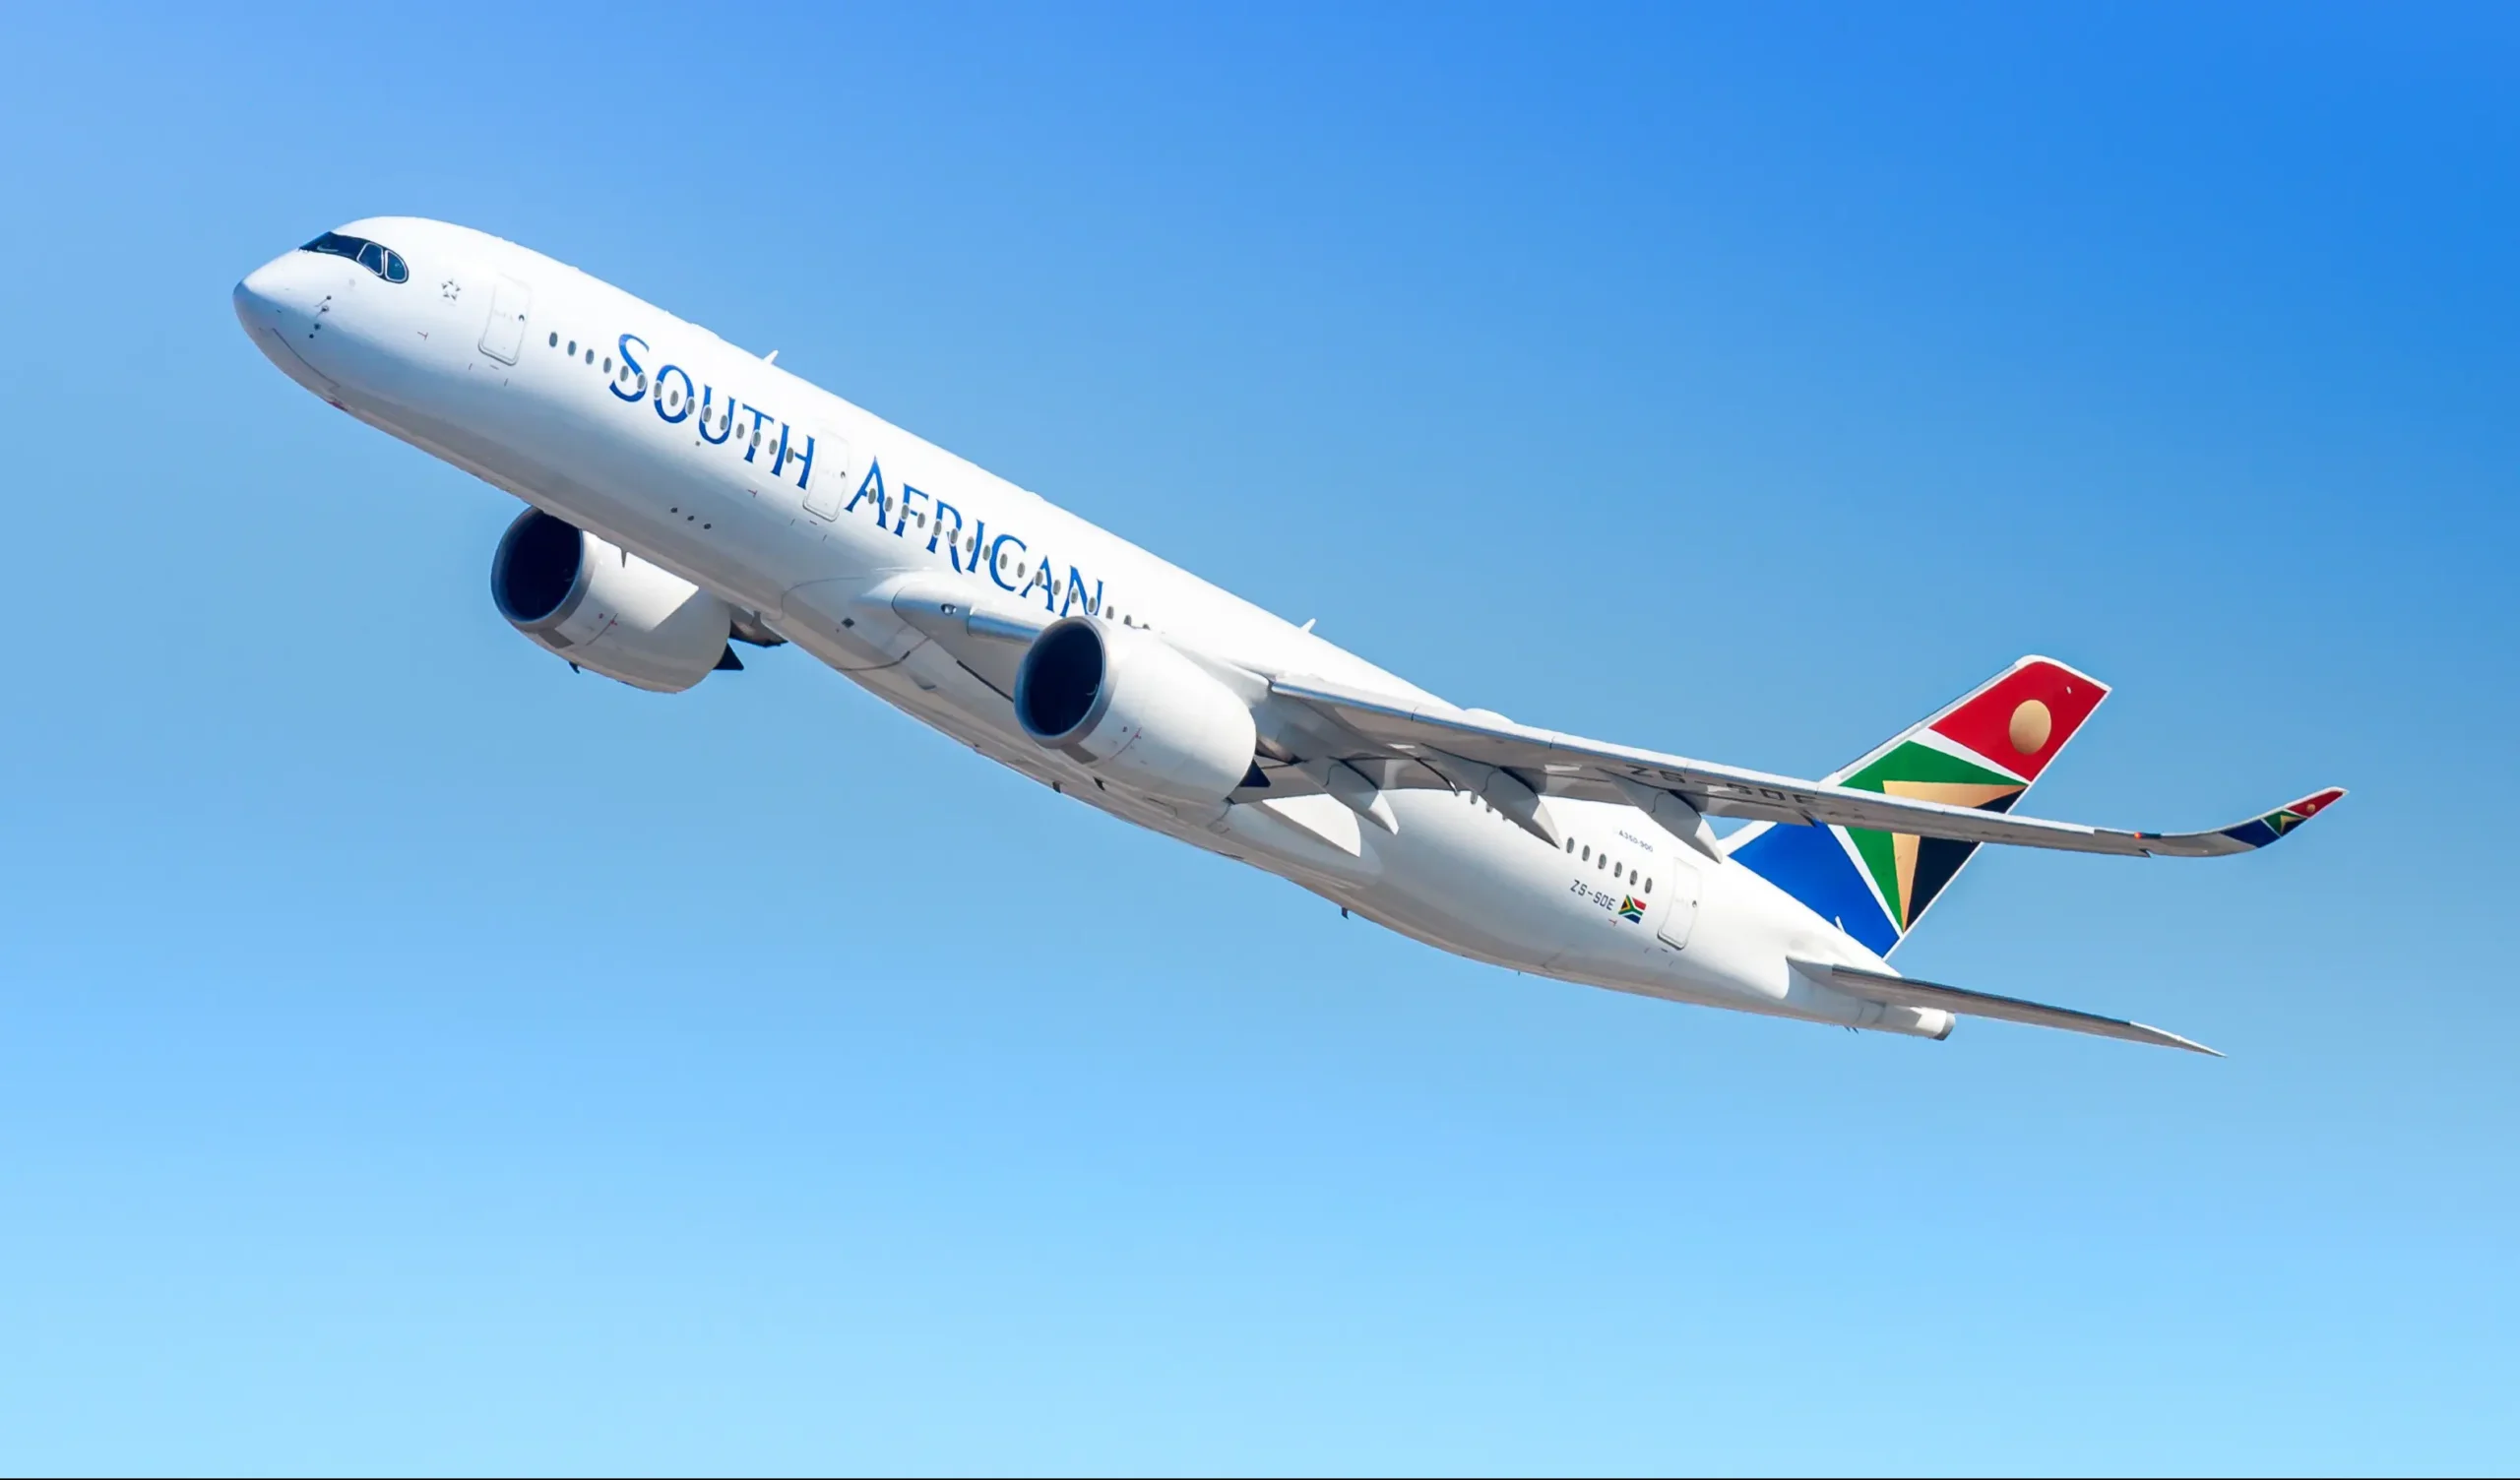 South African Airways: Your Gateway to Africa